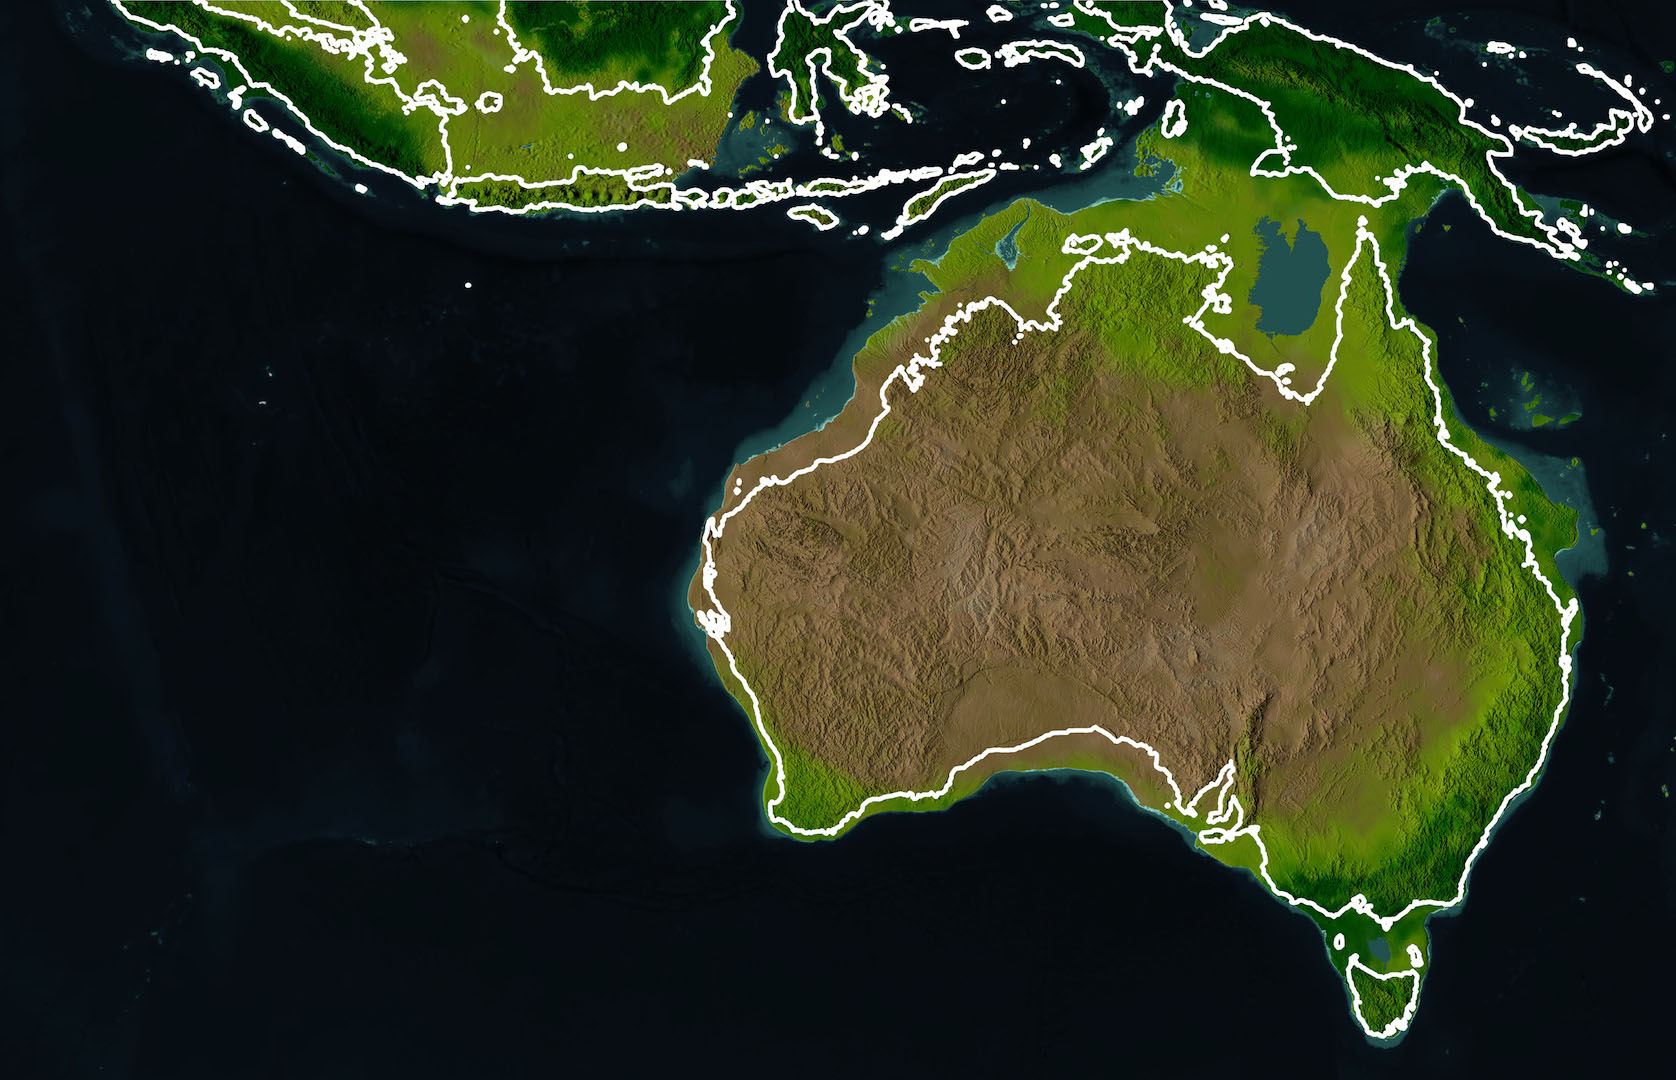 The modern Australian coastline compared to the former super-continent of Sahul